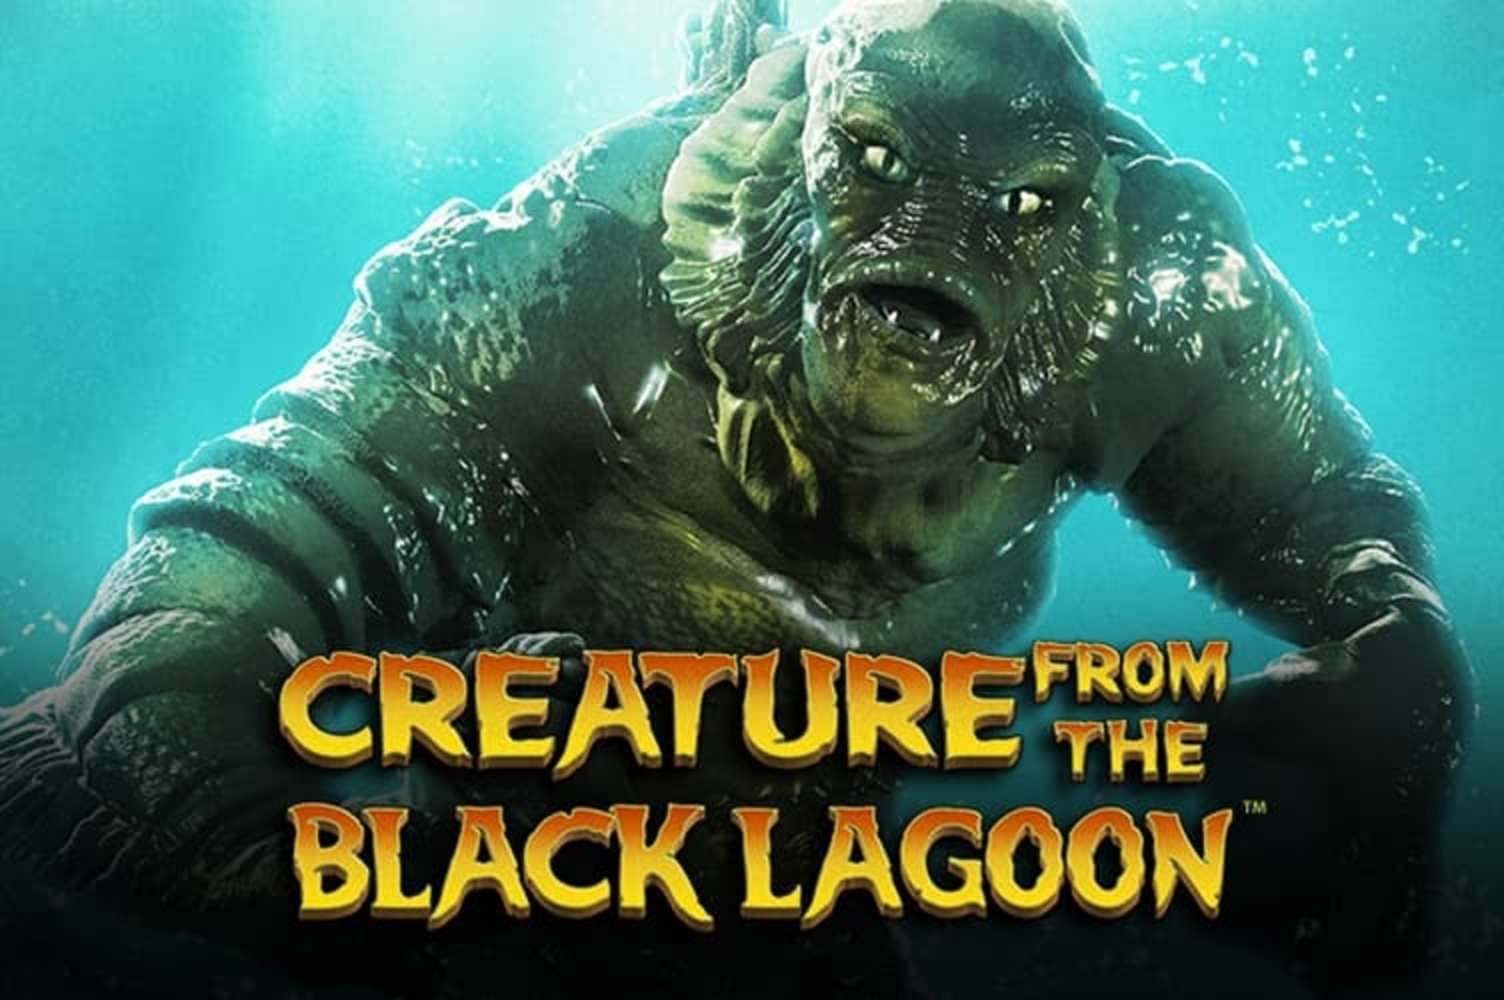 The Creature from the Black Lagoon Online Slot Demo Game by NetEnt